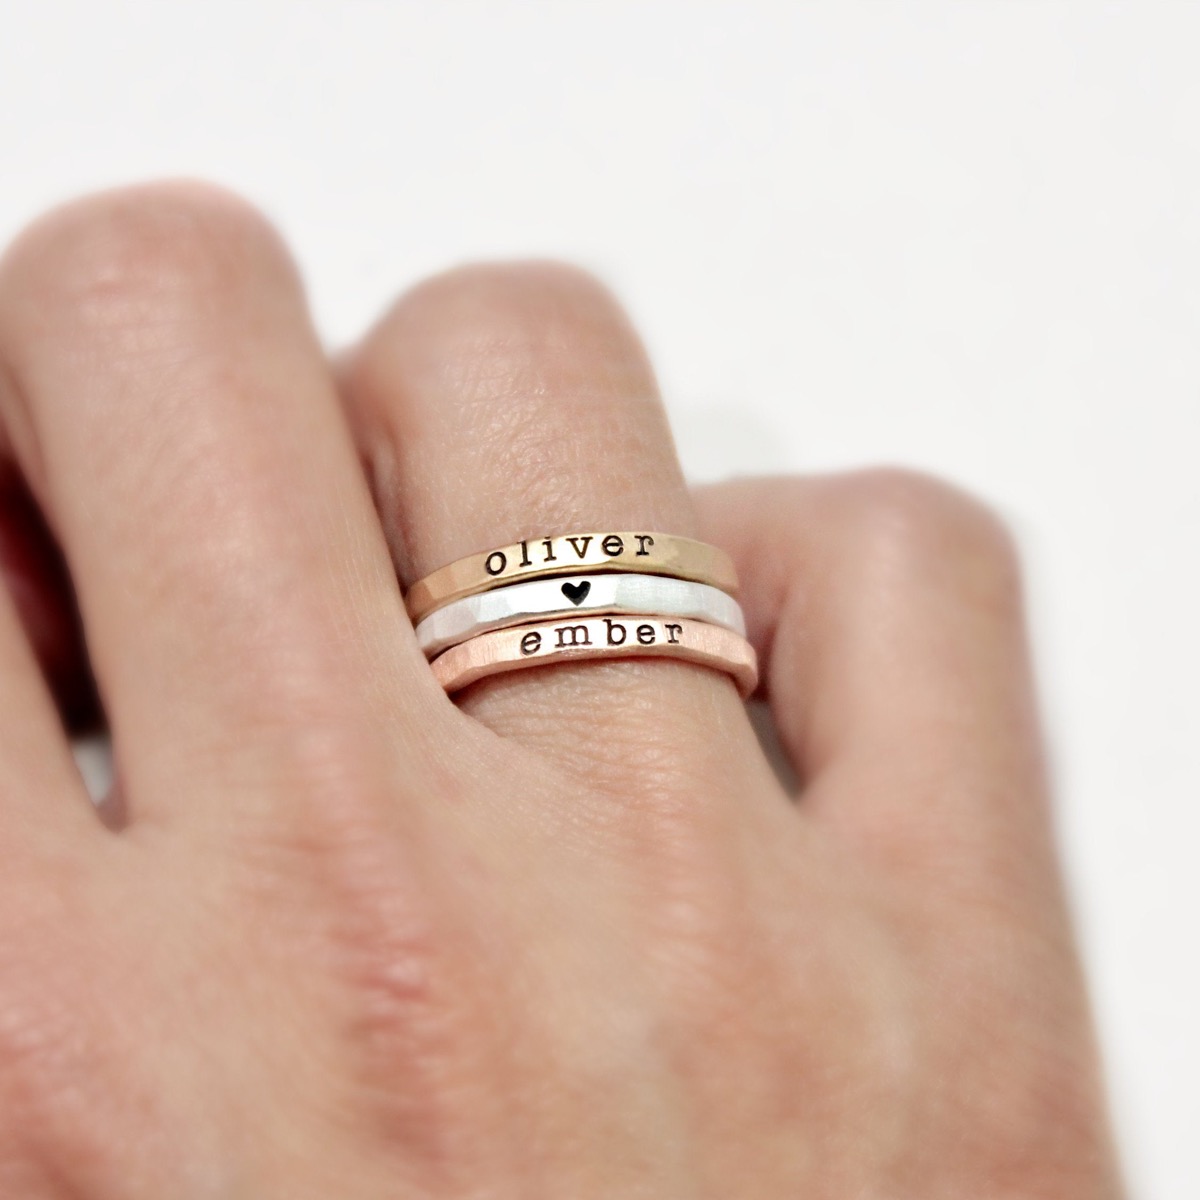 Stackable name rings